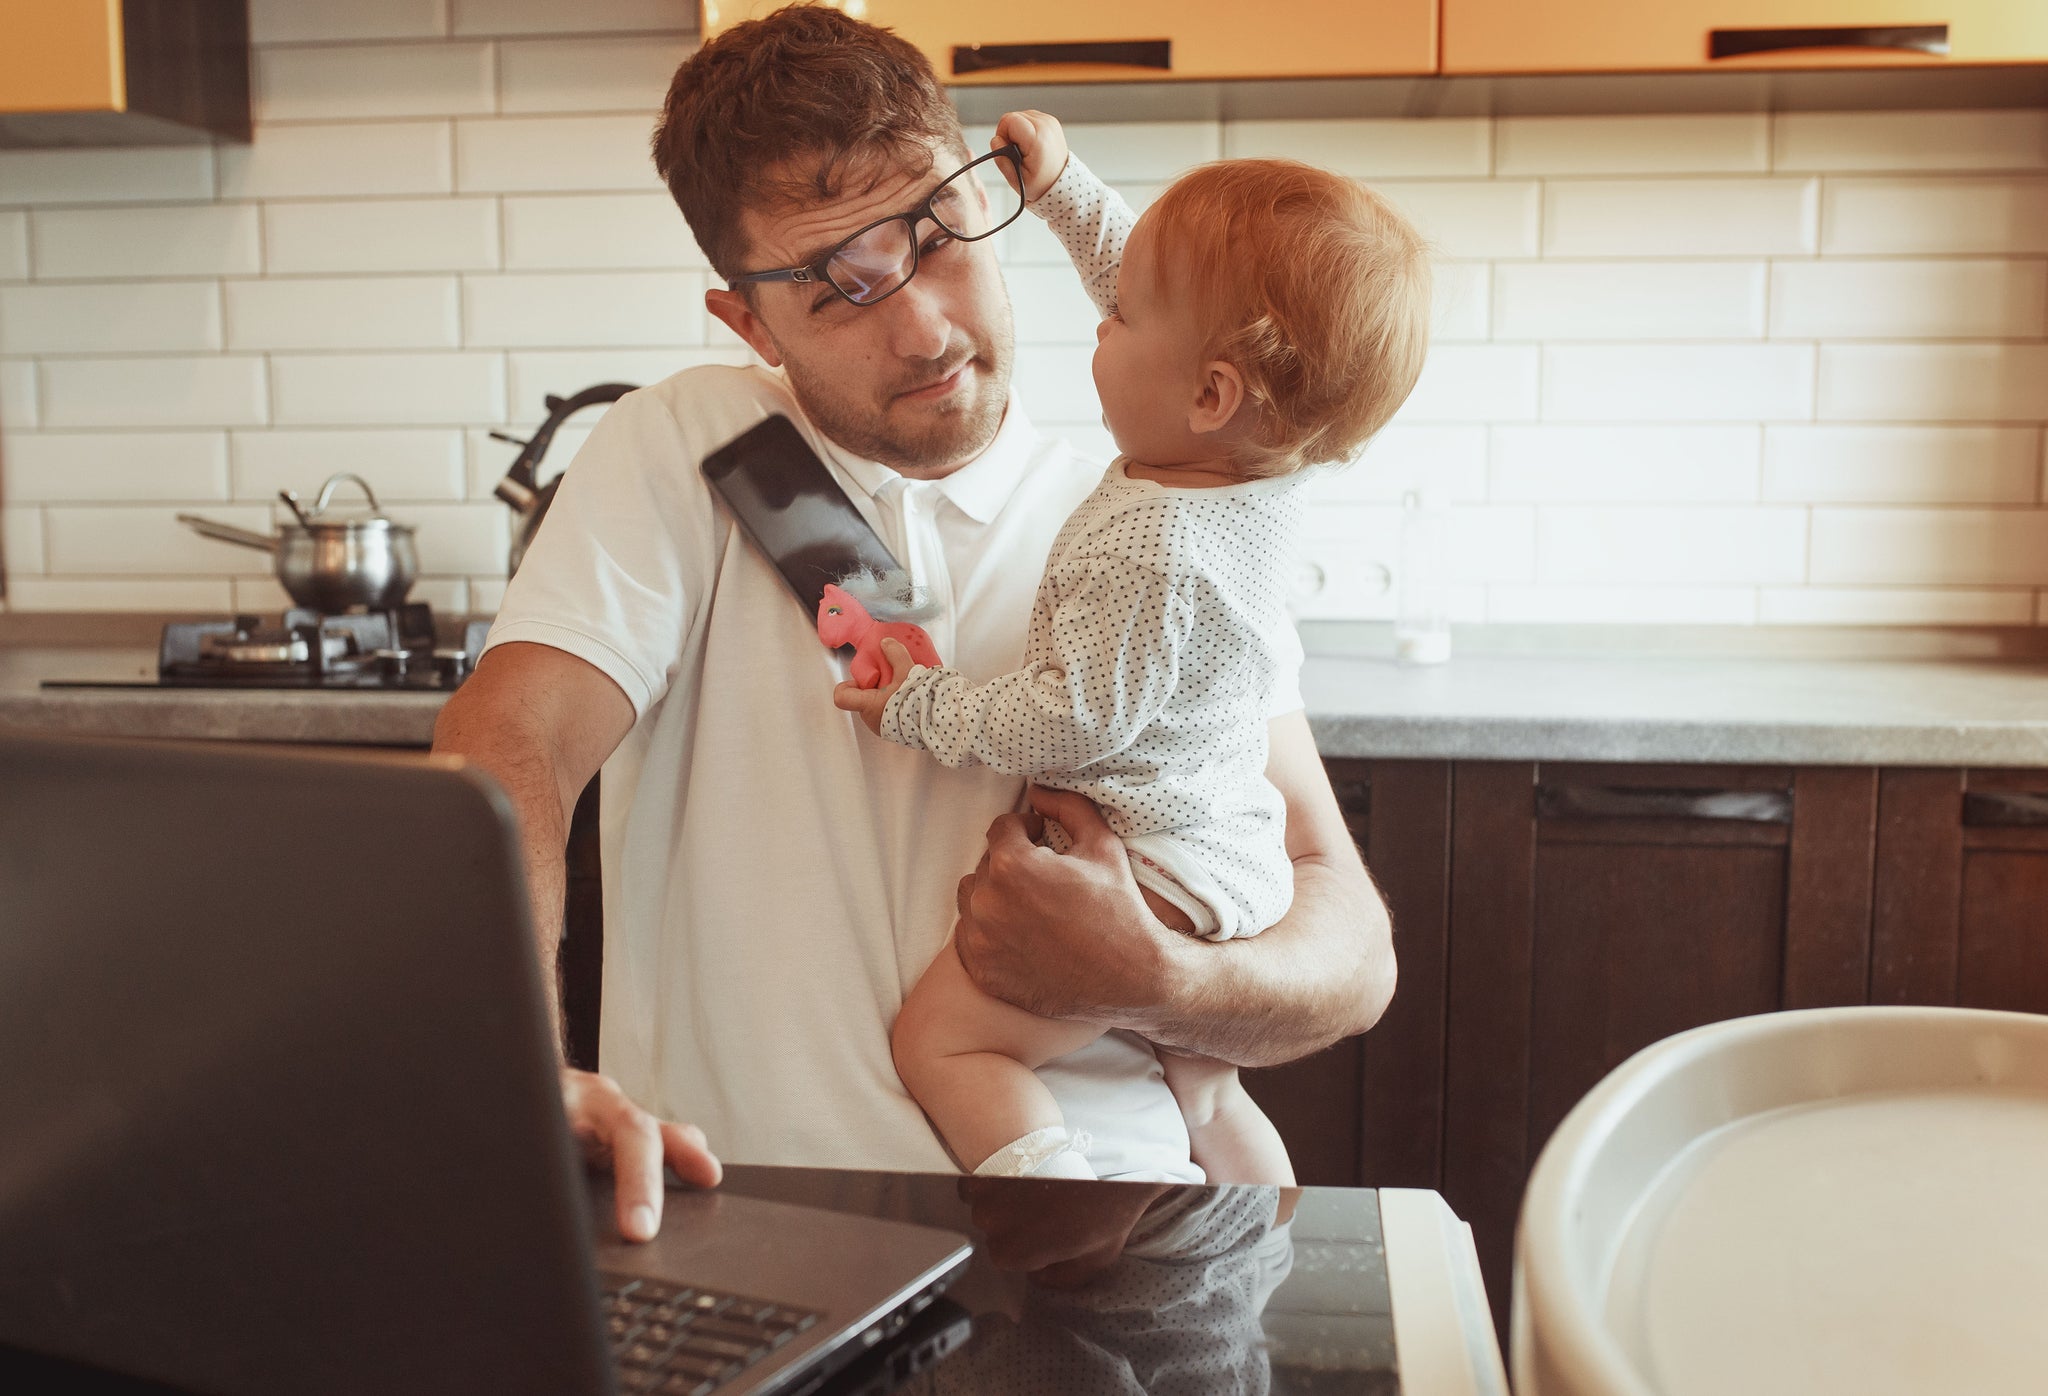 Four Work from Home Tips for Parents